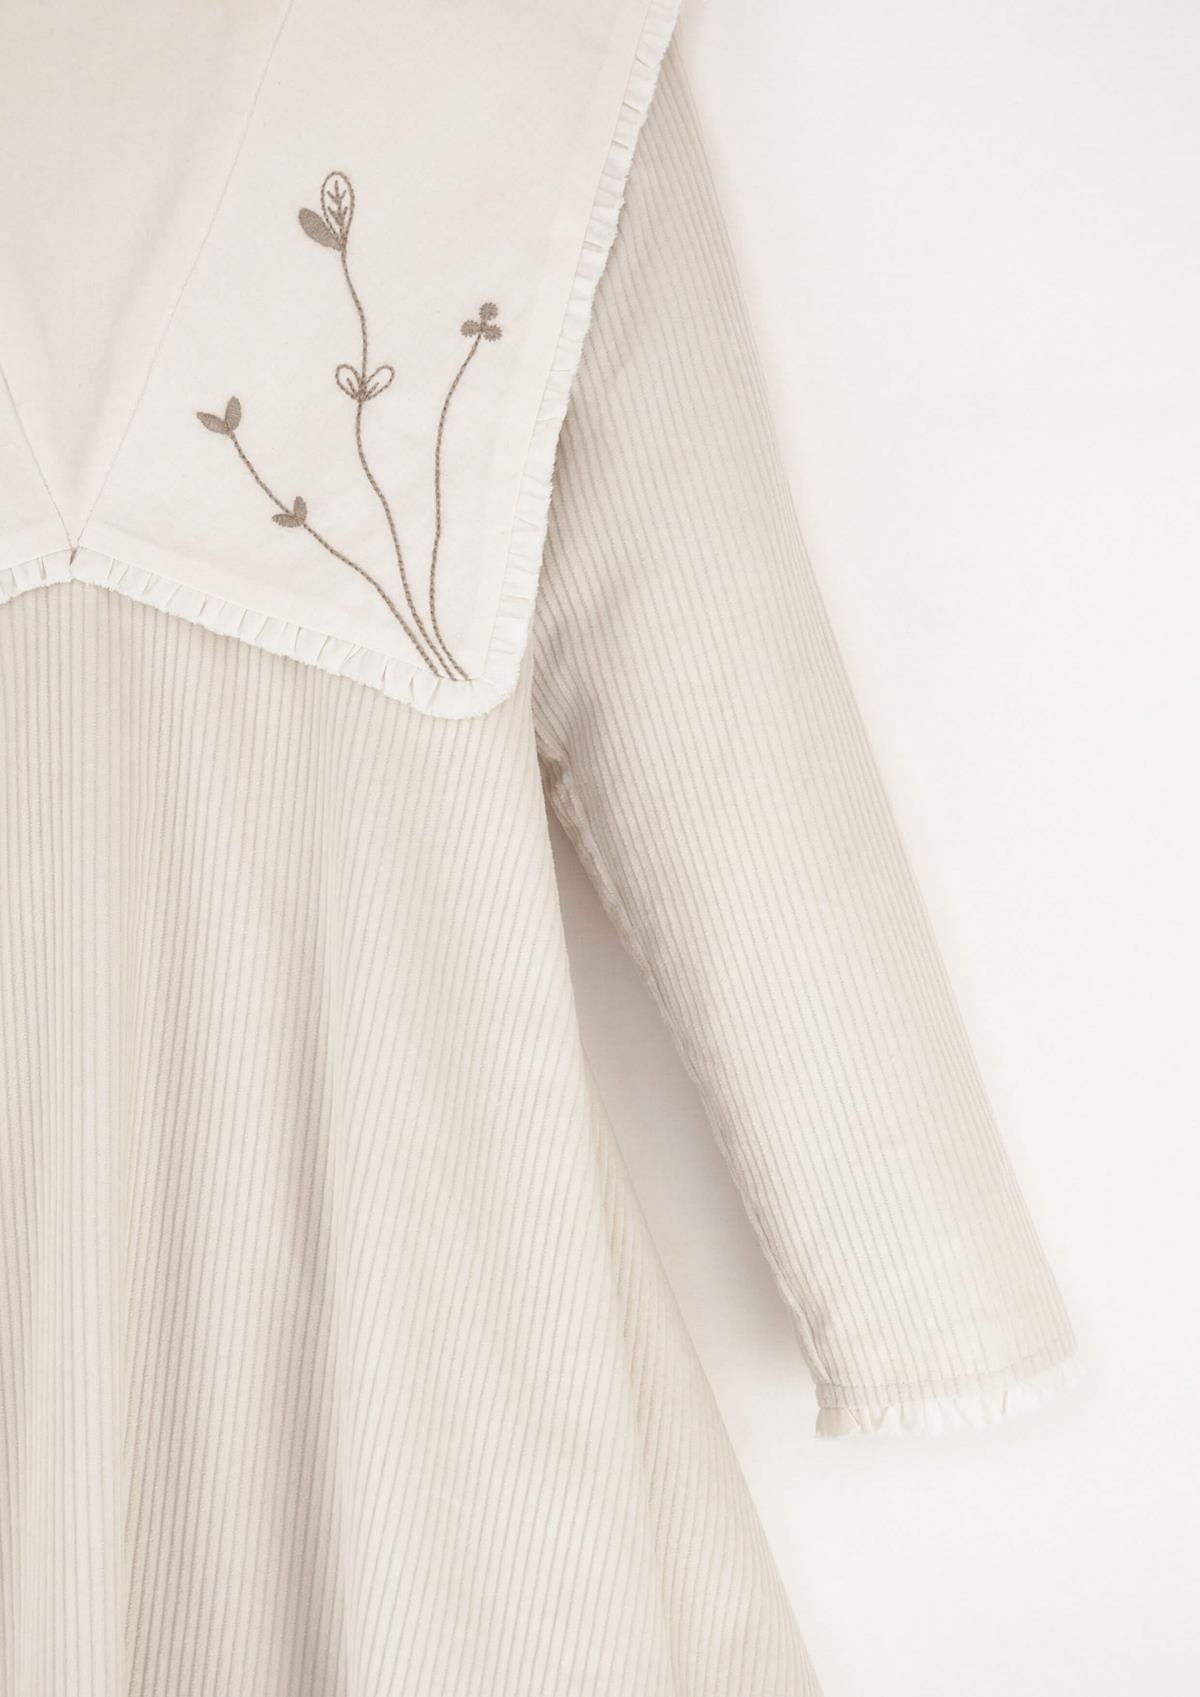 Mod.32.1 Off-white cape-style dress with artisan embroidered collar | AW23.24 Mod.32.1 Off-white cape-style dress with artisan embroidered collar